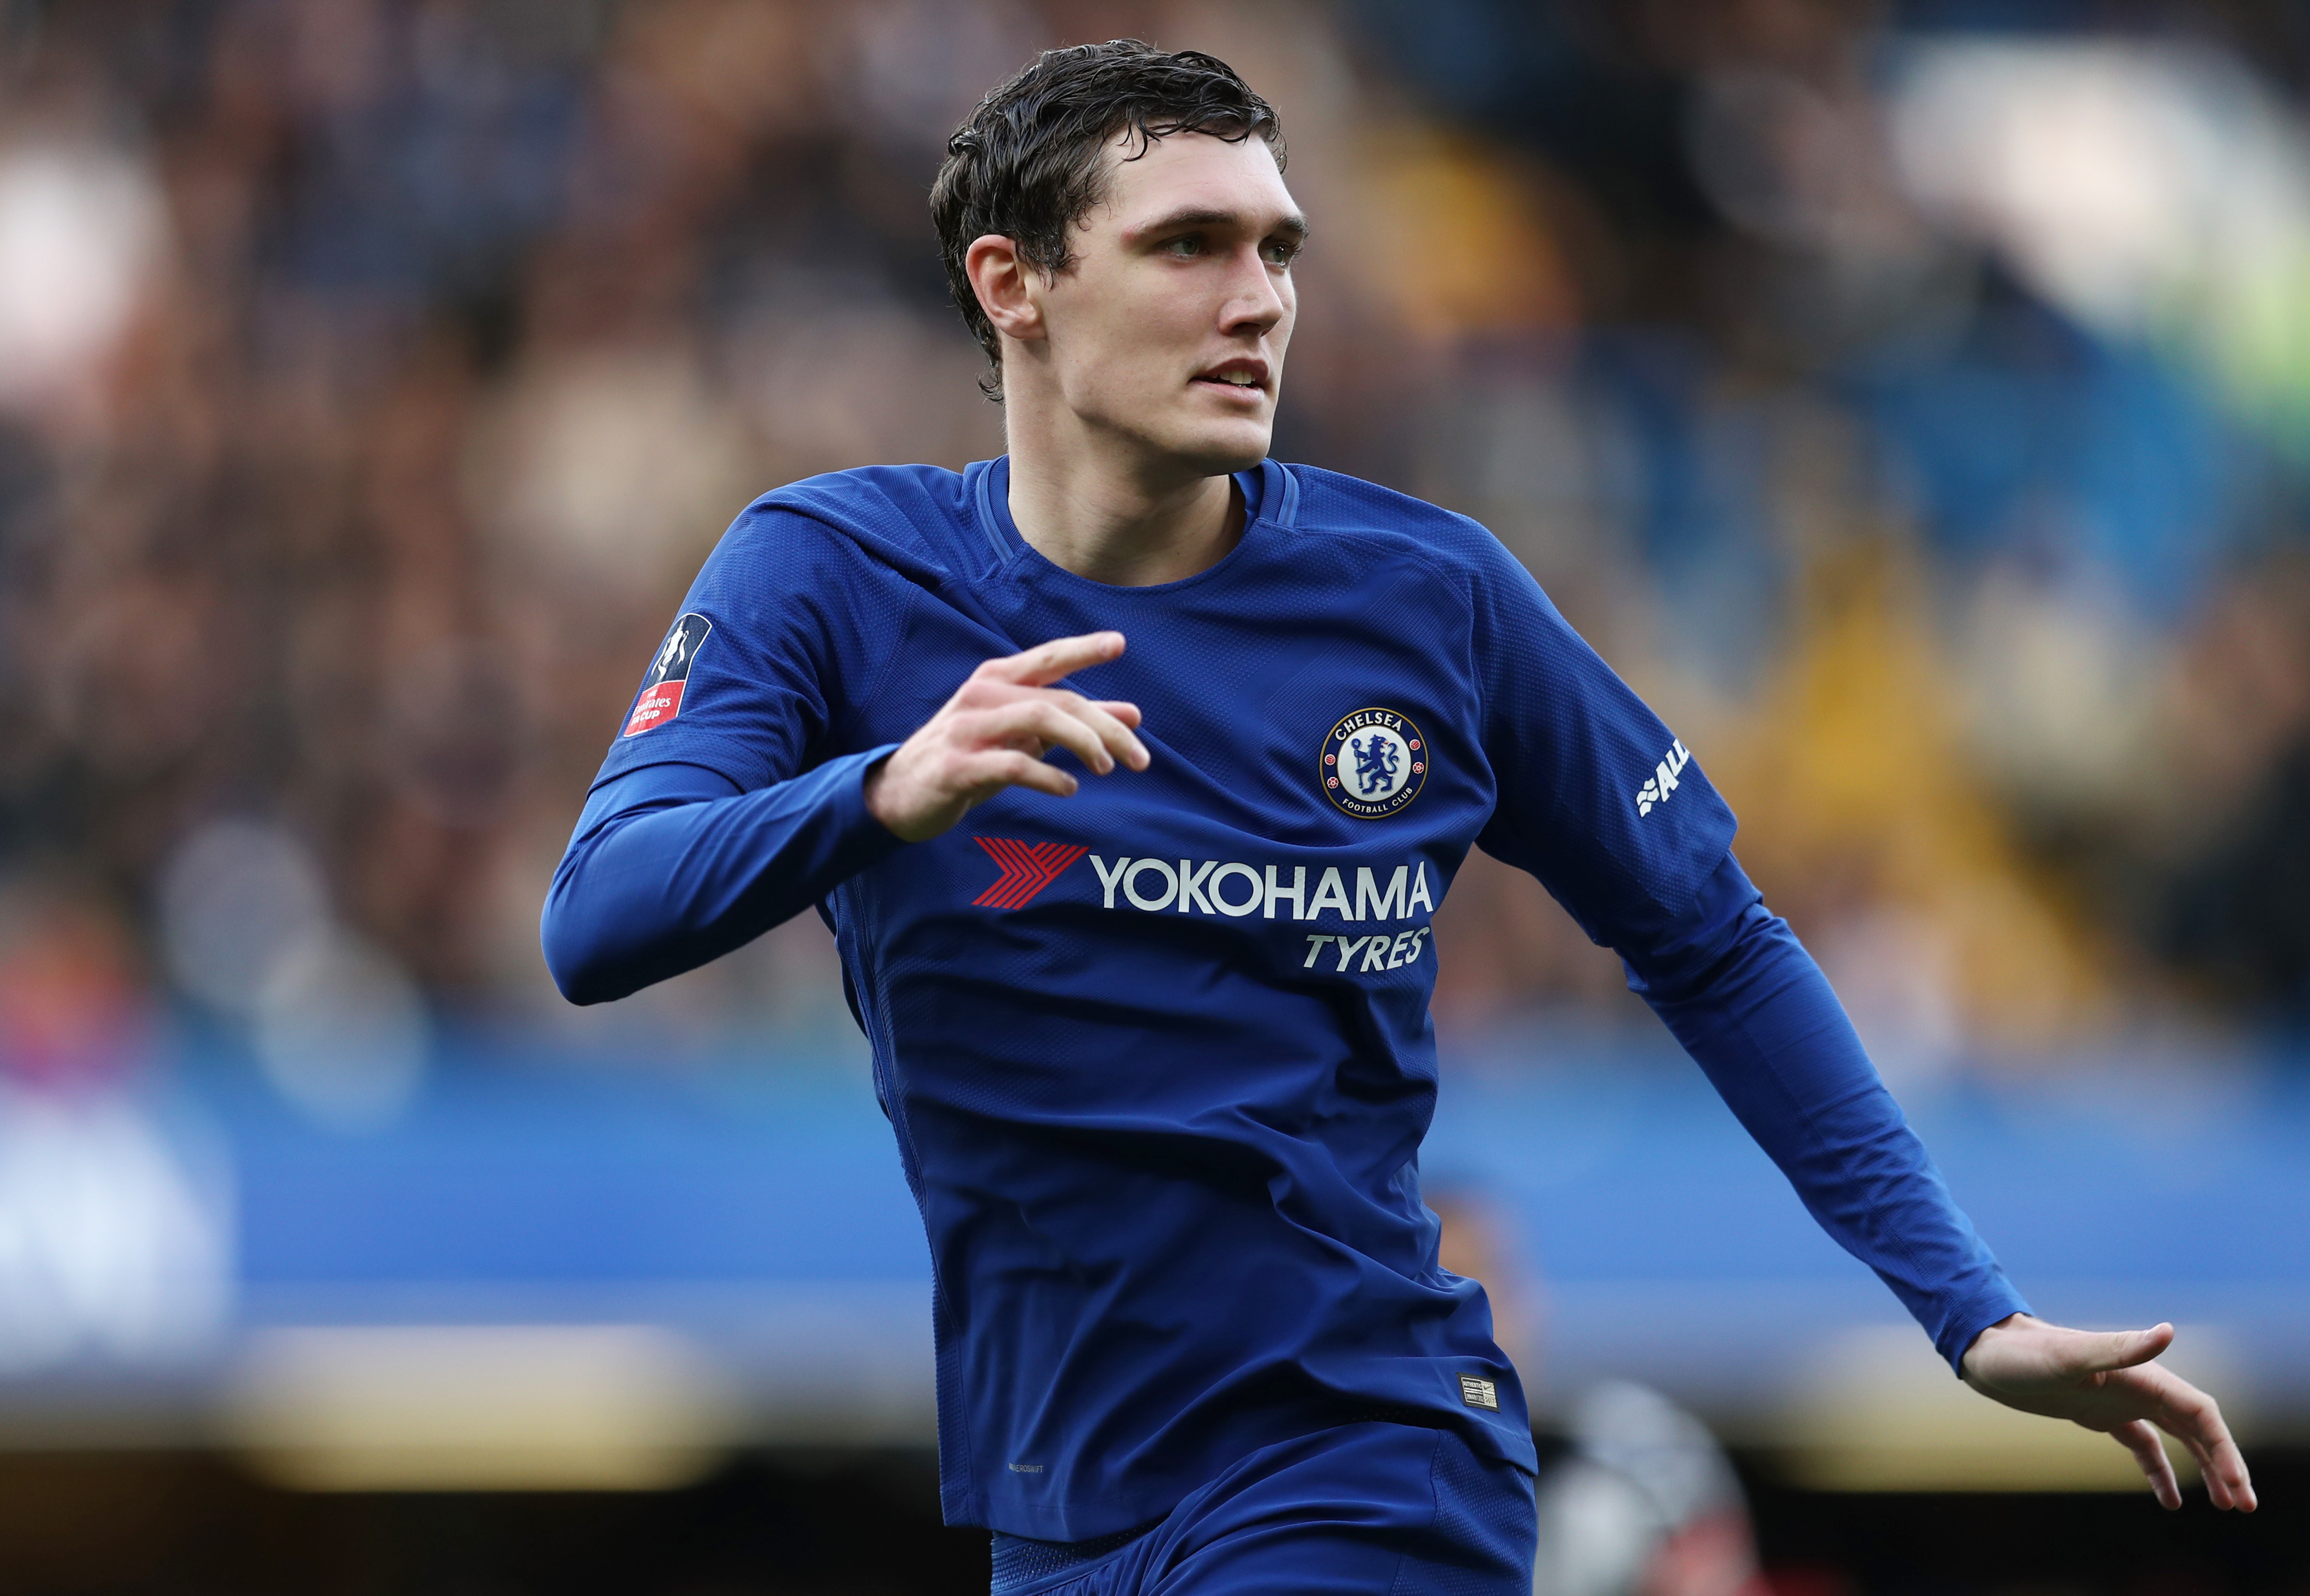 LONDON, ENGLAND - JANUARY 28: Andreas Christensen of Chelsea during the Emirates FA Cup Fourth Round match between Chelsea and Newcastle United on January 28, 2018 in London, United Kingdom. (Photo by Catherine Ivill/Getty Images)